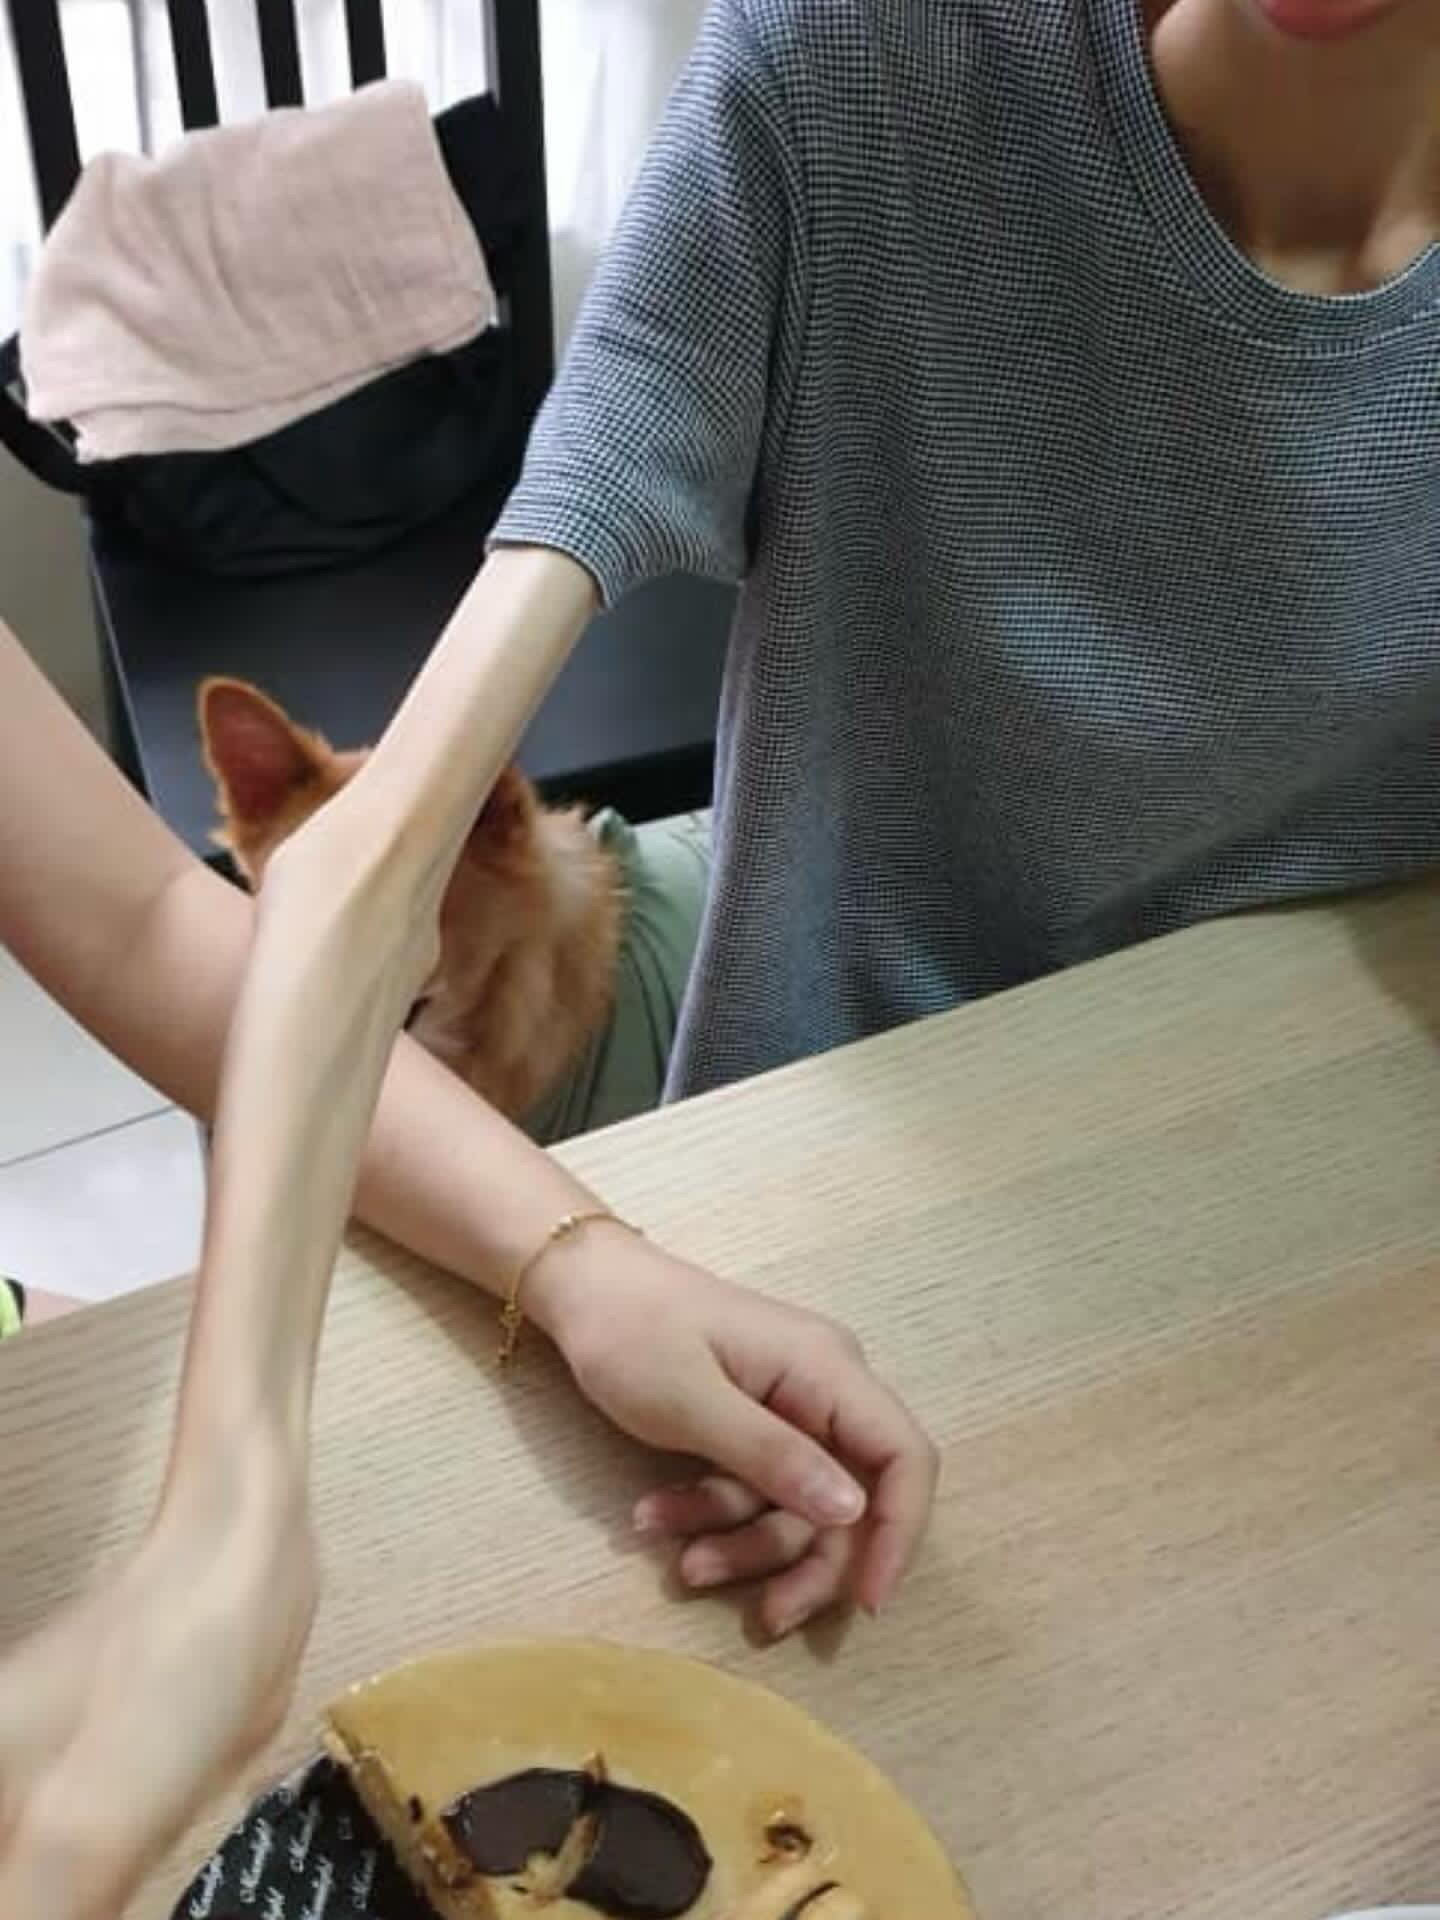 Comparison of fion's arm with anorexia vs normal people